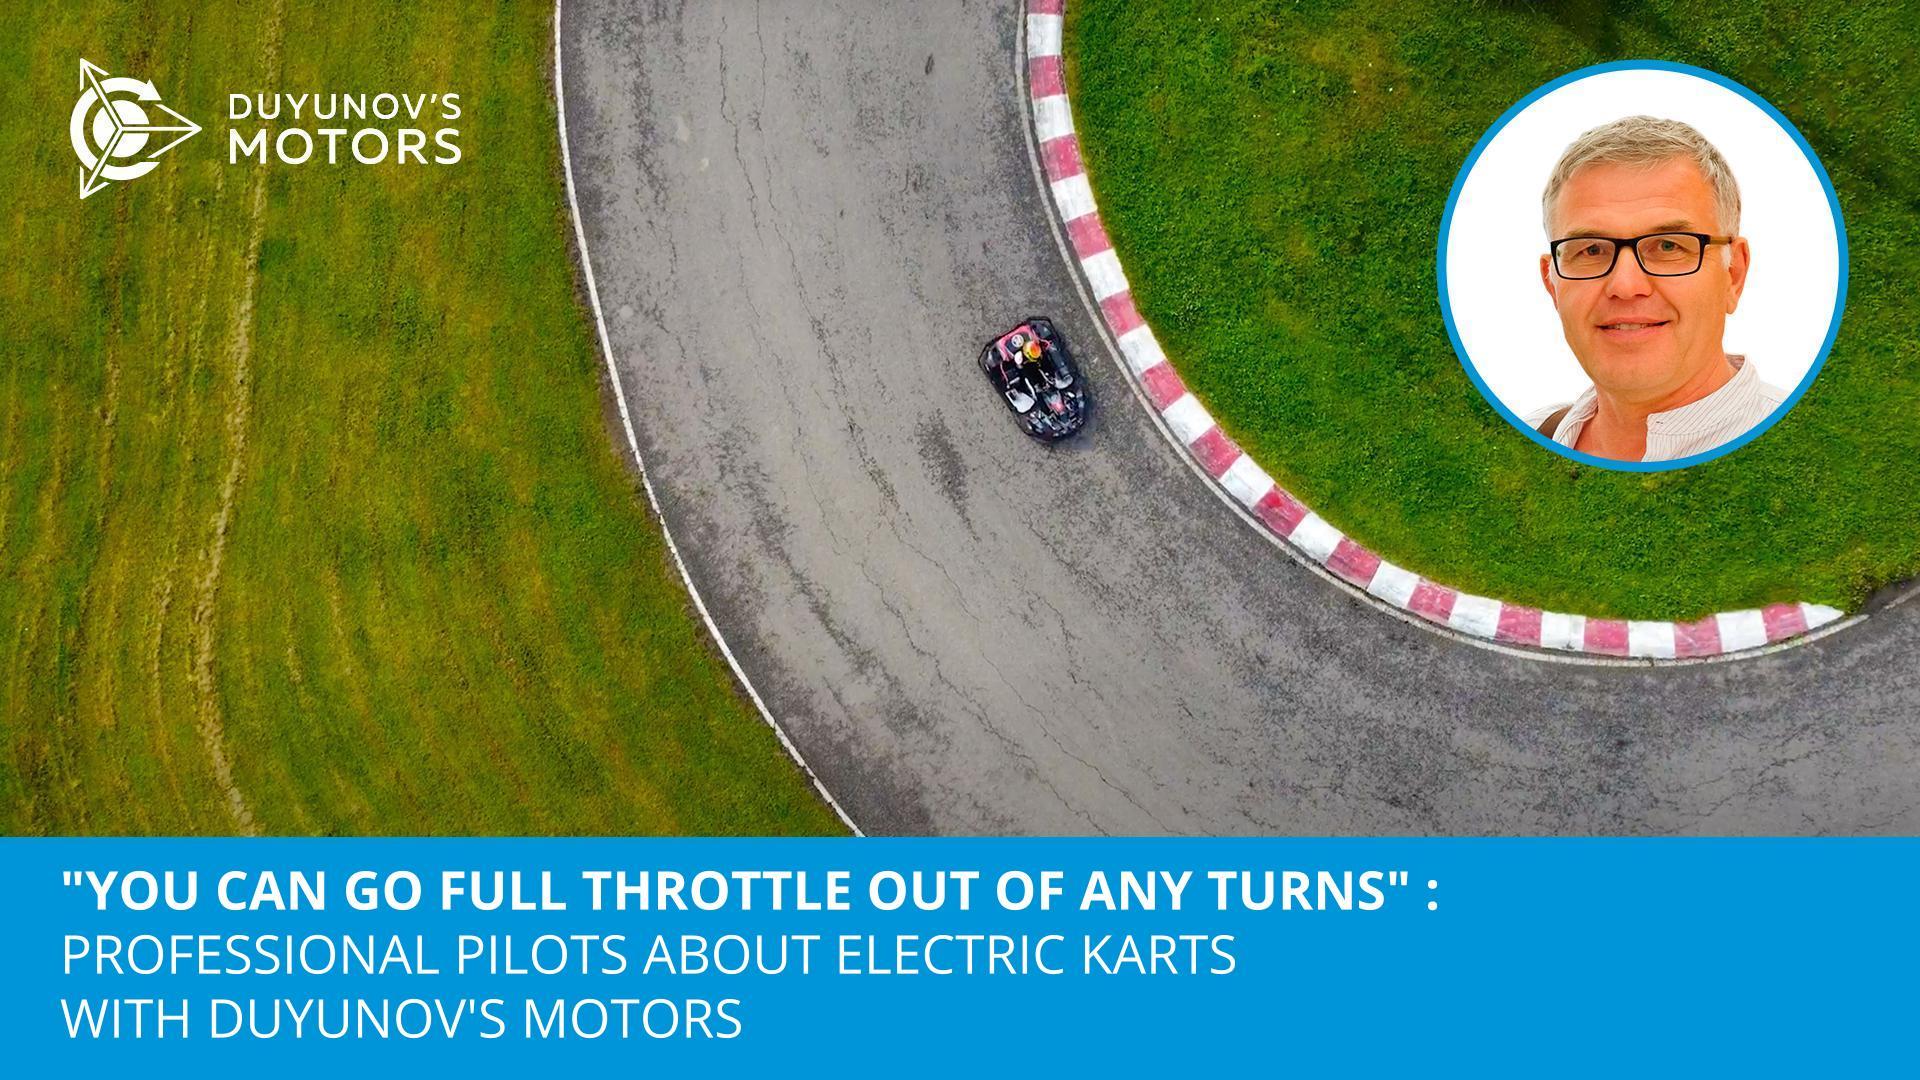 "You can go full throttle out of any turns": professional pilots about electric karts with Duyunov's motors